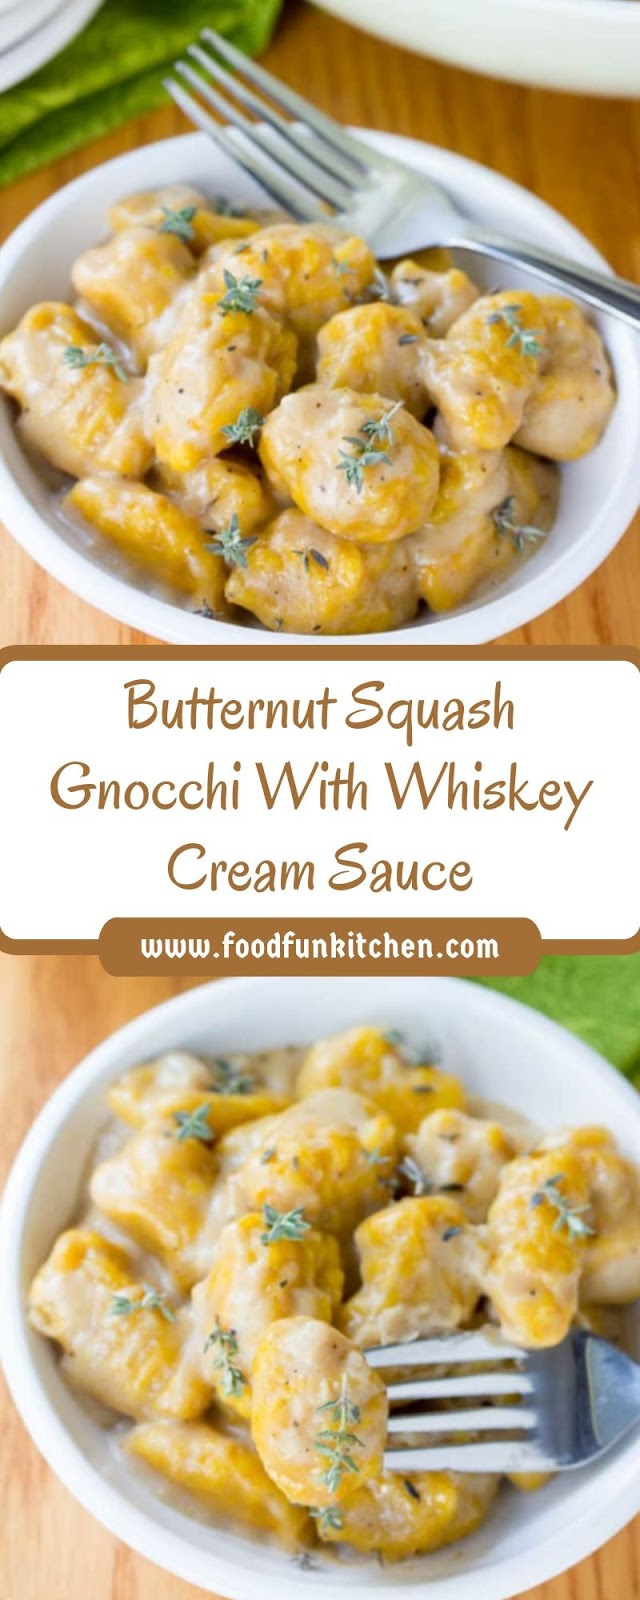 A well worth-while exertions of love, AKA Butternut Squash Gnocchi with Whiskey Cream Sauce.